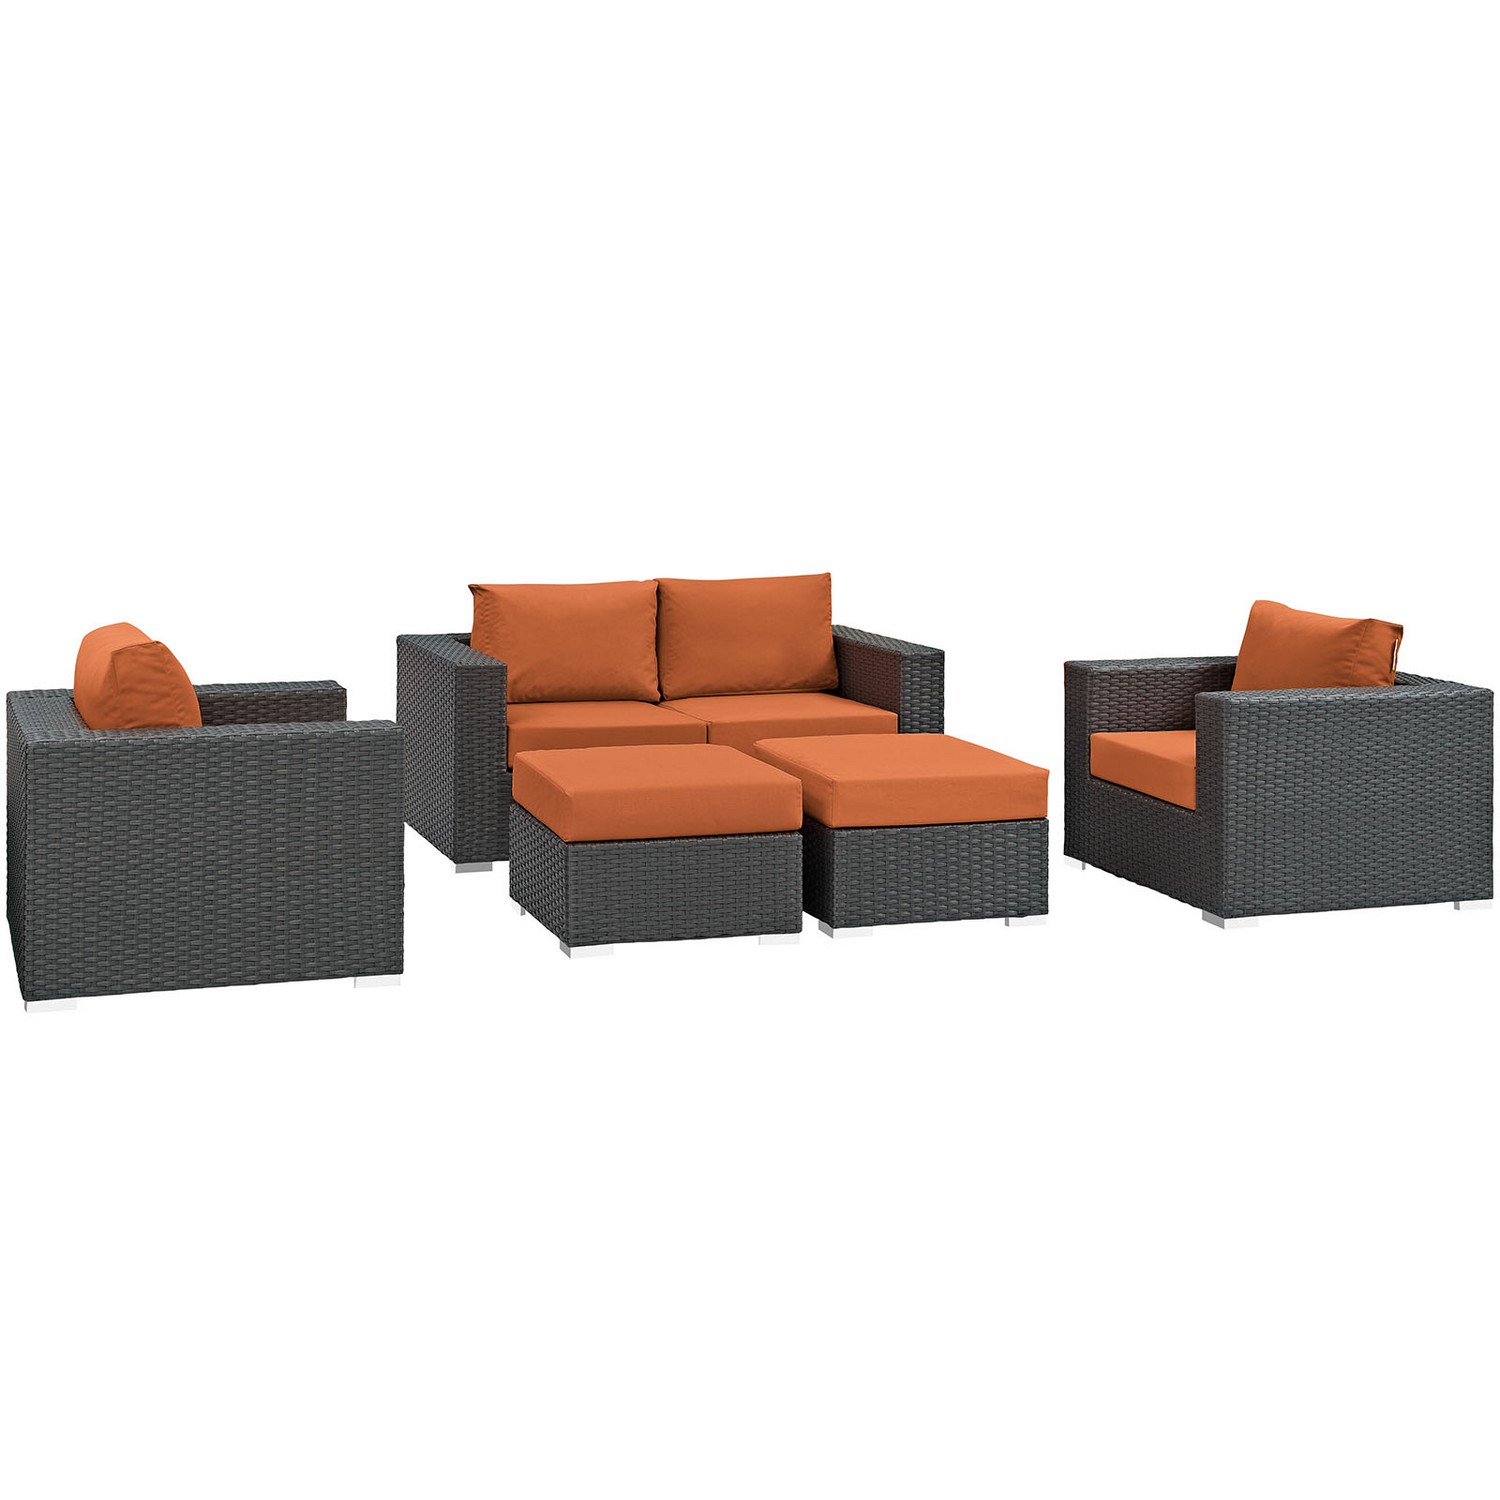 Modway Sojourn 5 Piece Outdoor Patio Sunbrella Sectional Set - Canvas Tuscan